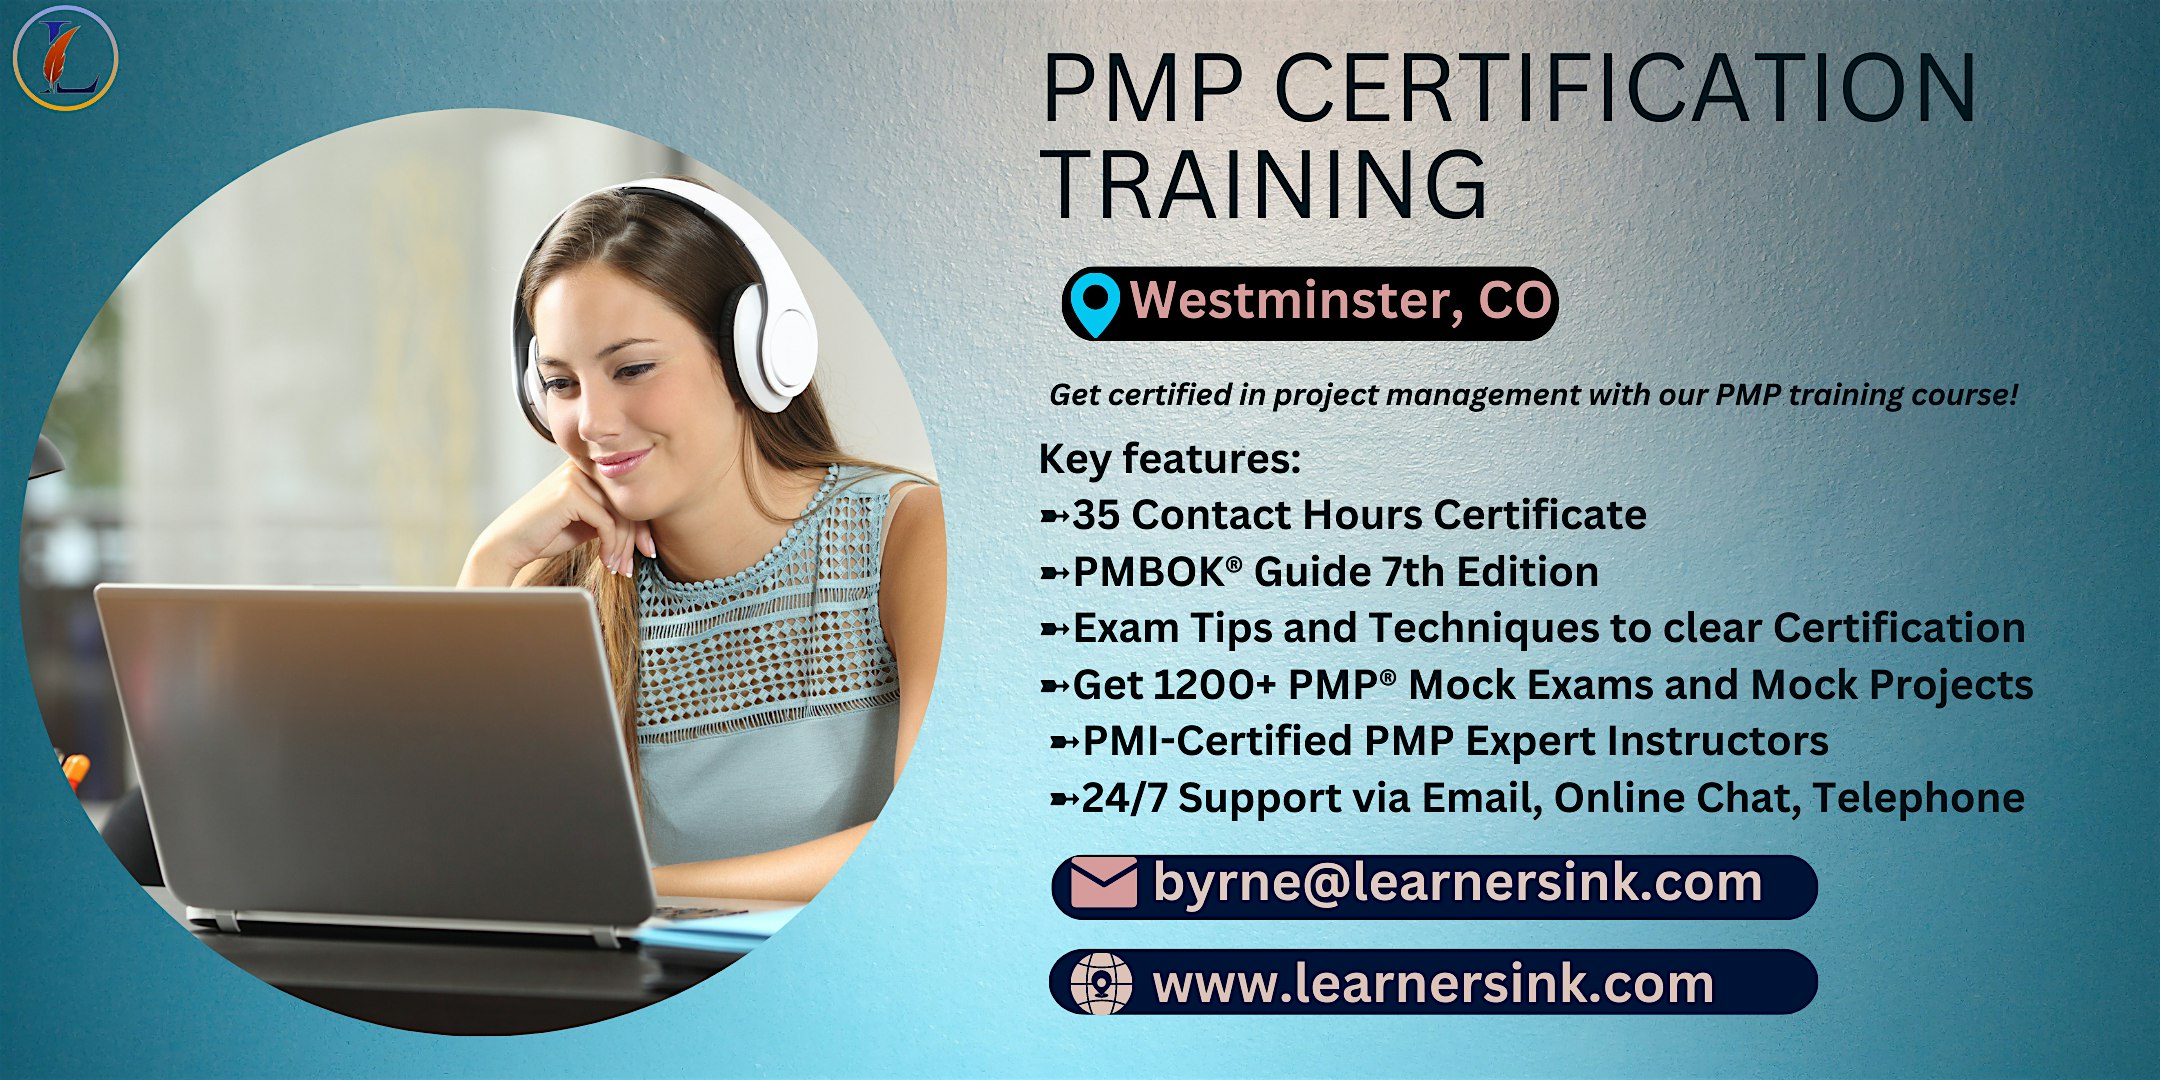 Increase your Profession with PMP Certification in Westminster, CO